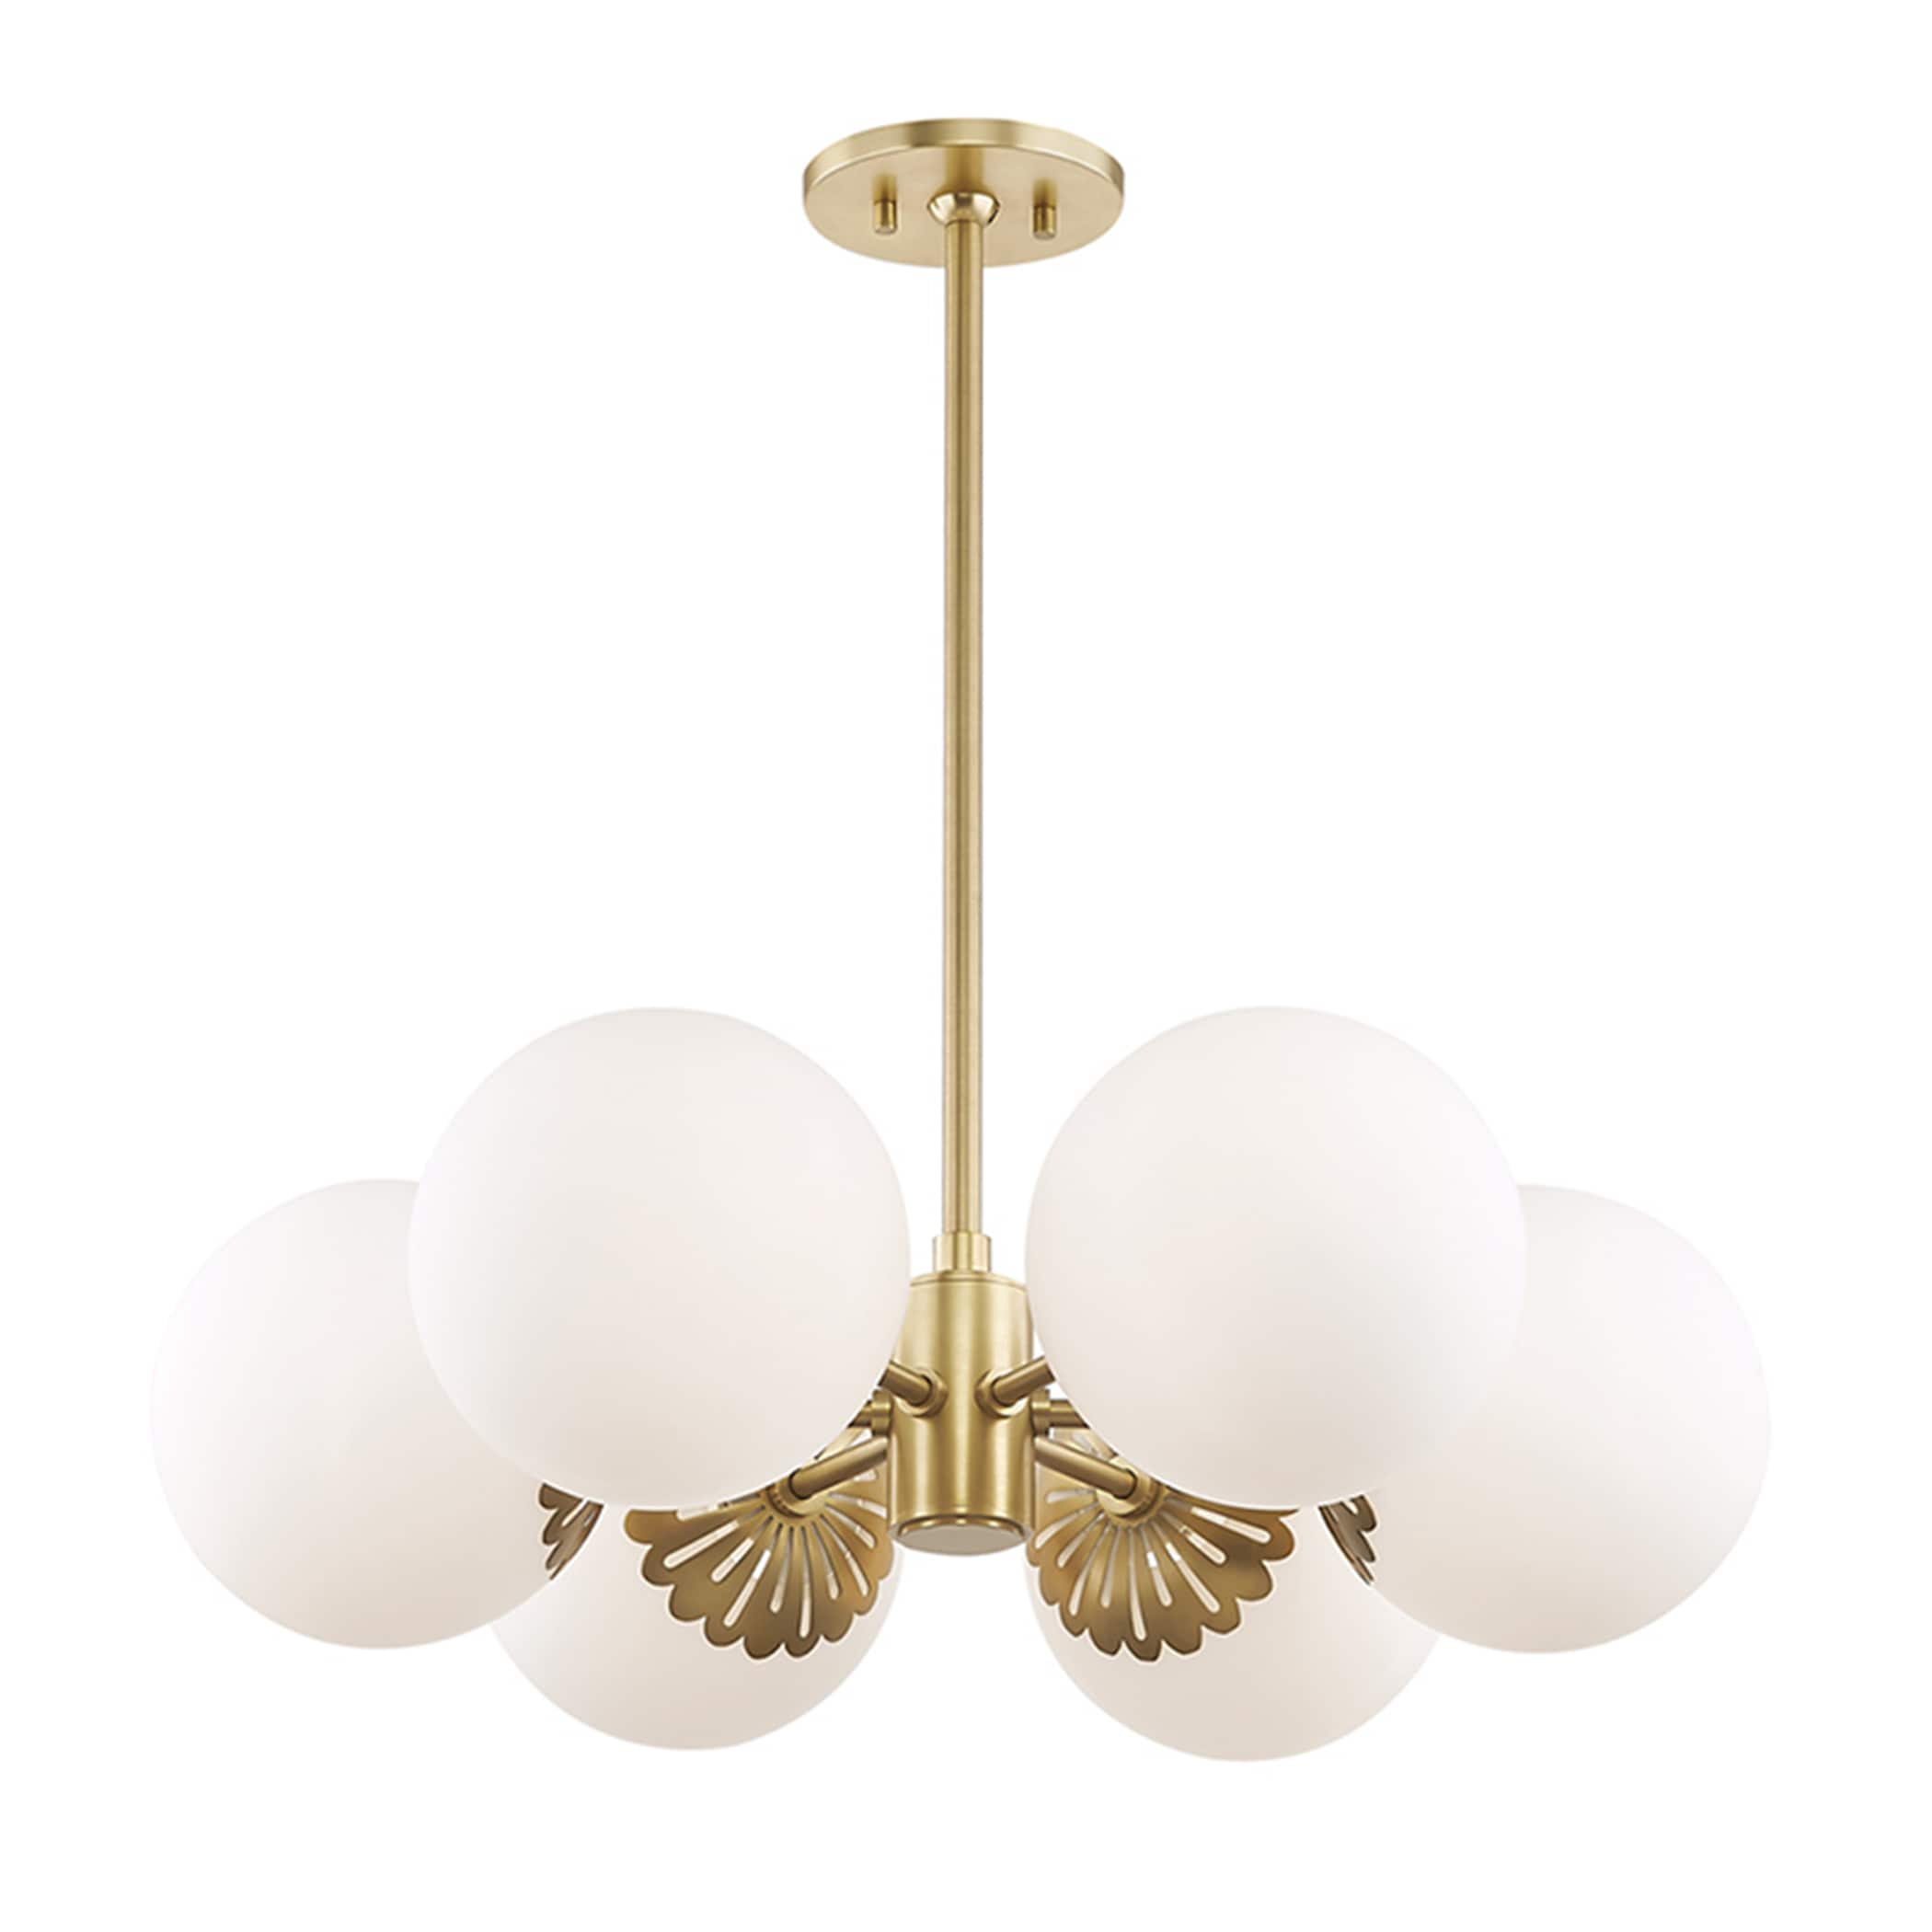 Mitzi By Hudson Valley Lighting Paige 6